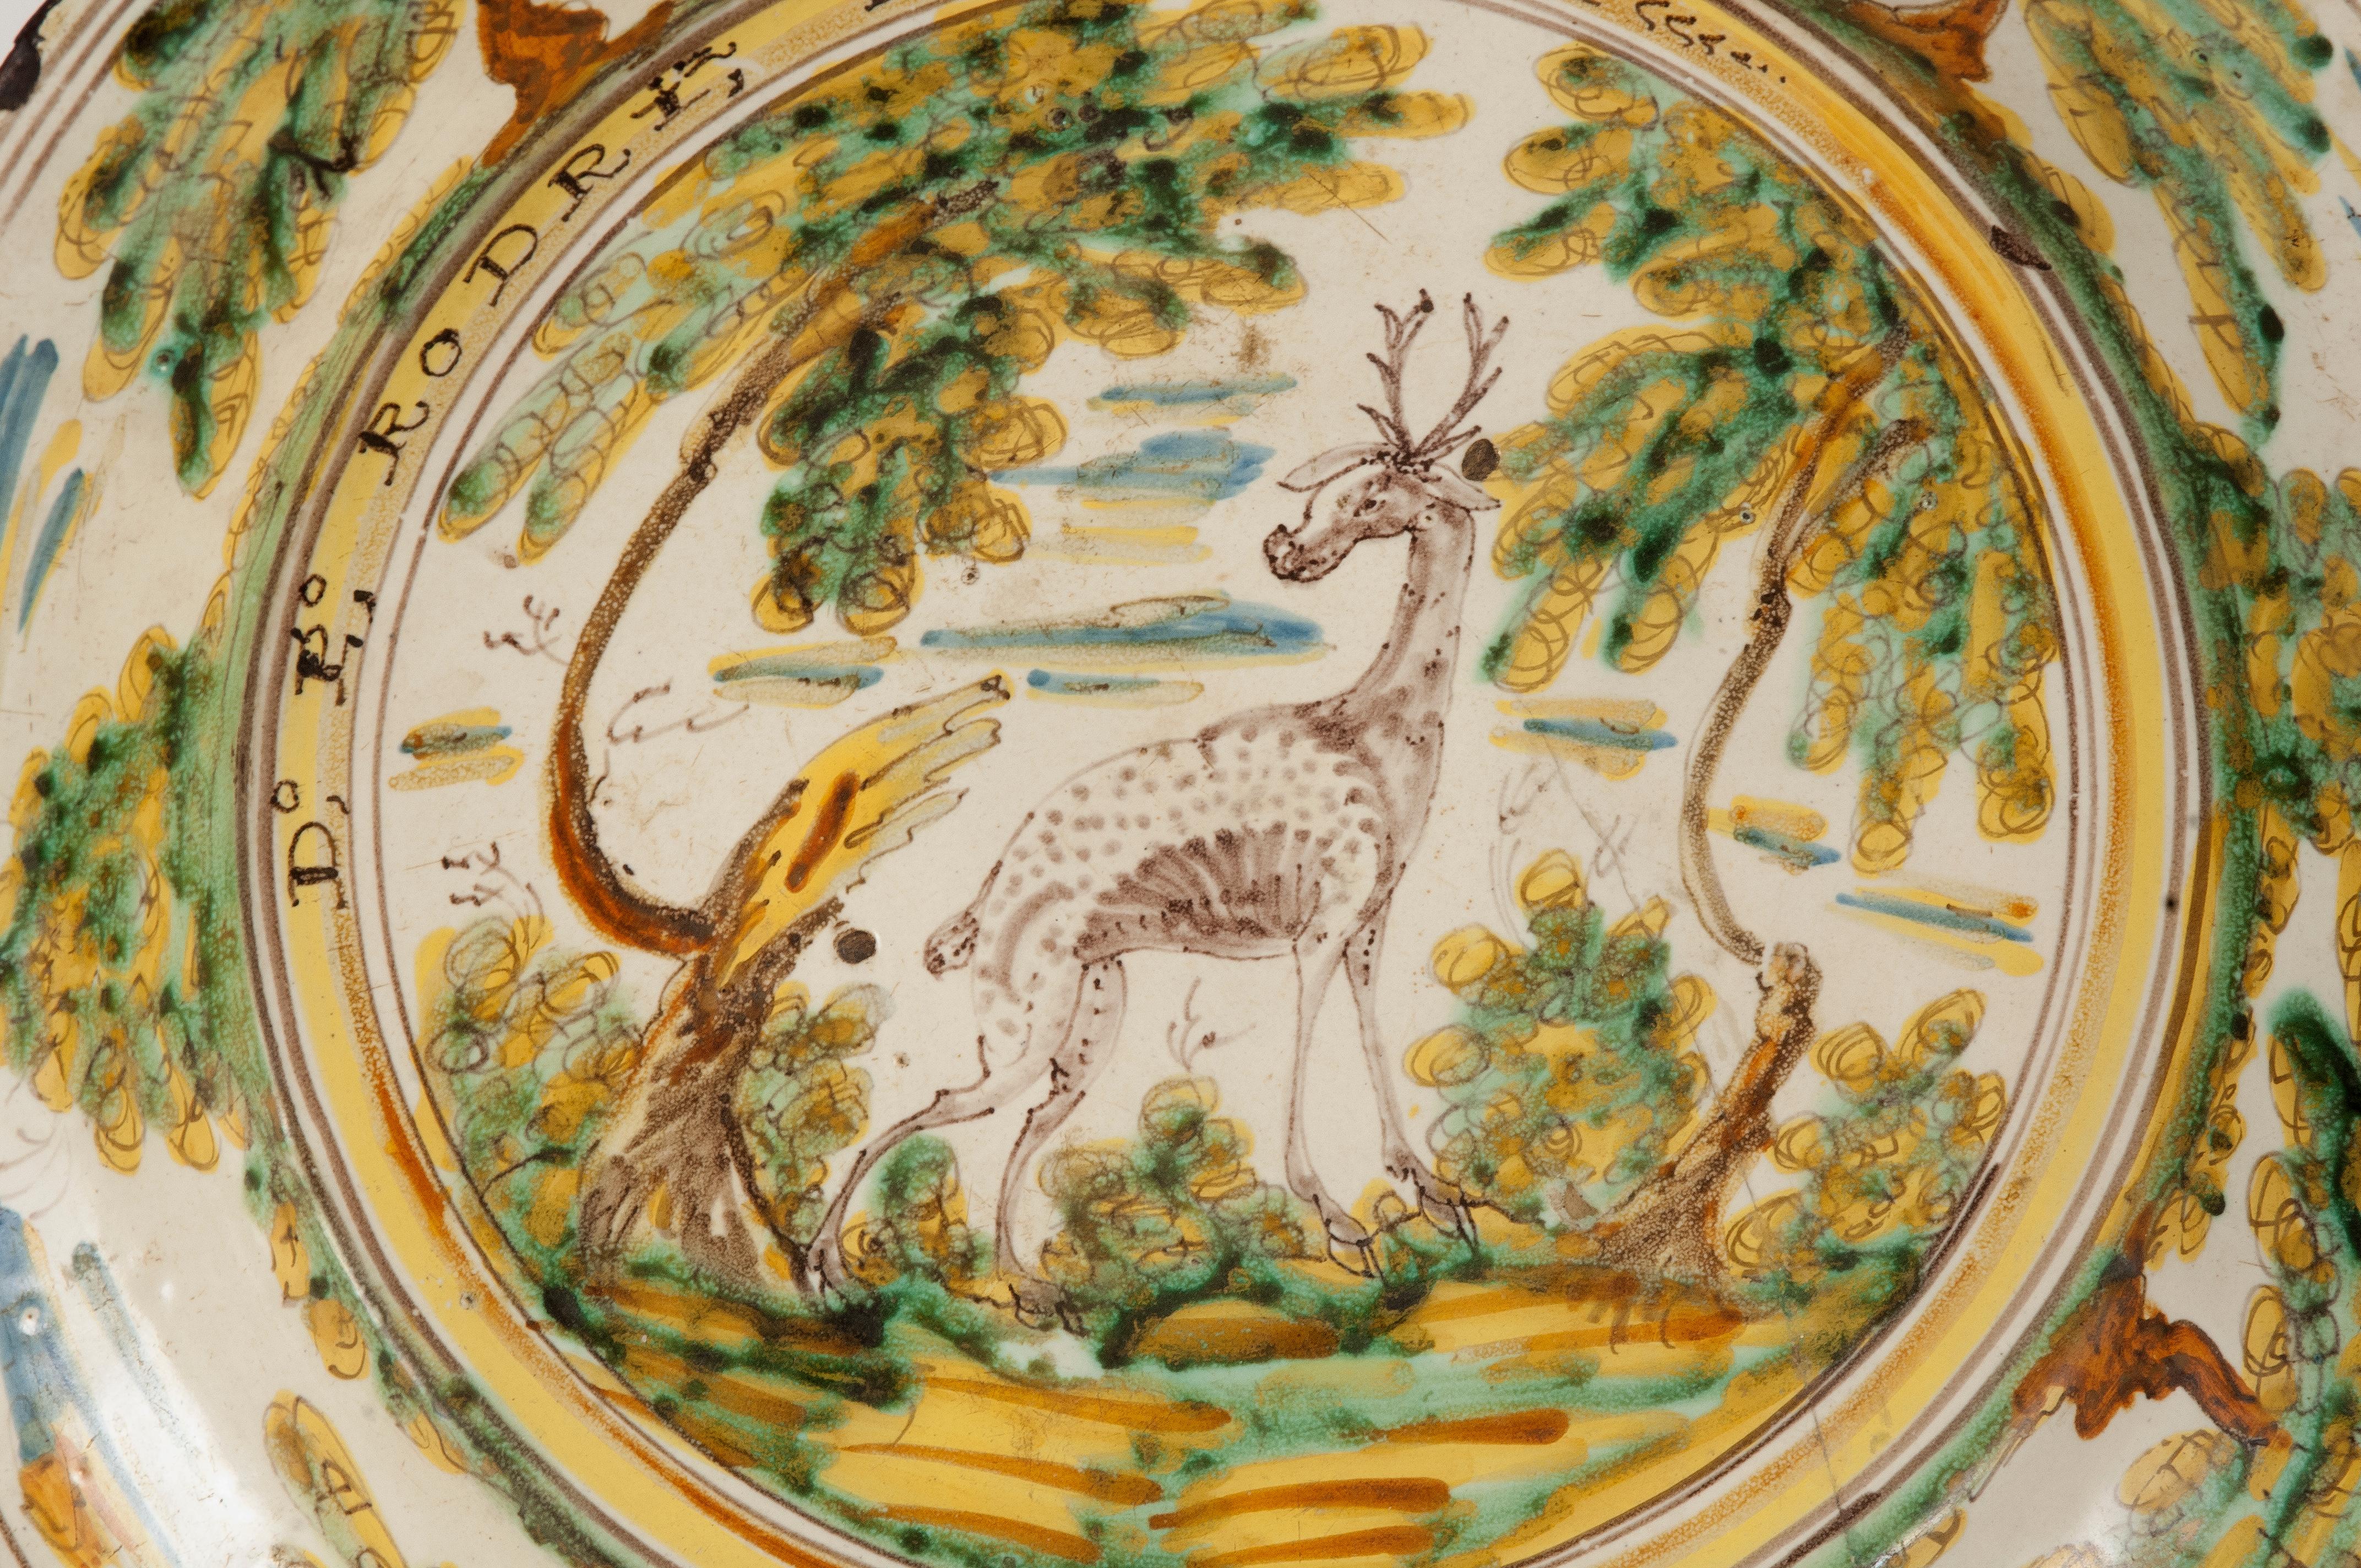 Ceramic plate decorated with high temperature enamels on a white tin opaque slip. The polychromy is based on typical Talavera colors: cobalt blue, copper green, manganese black, antimony yellow and ochres, browns and iron oranges. These enamels were